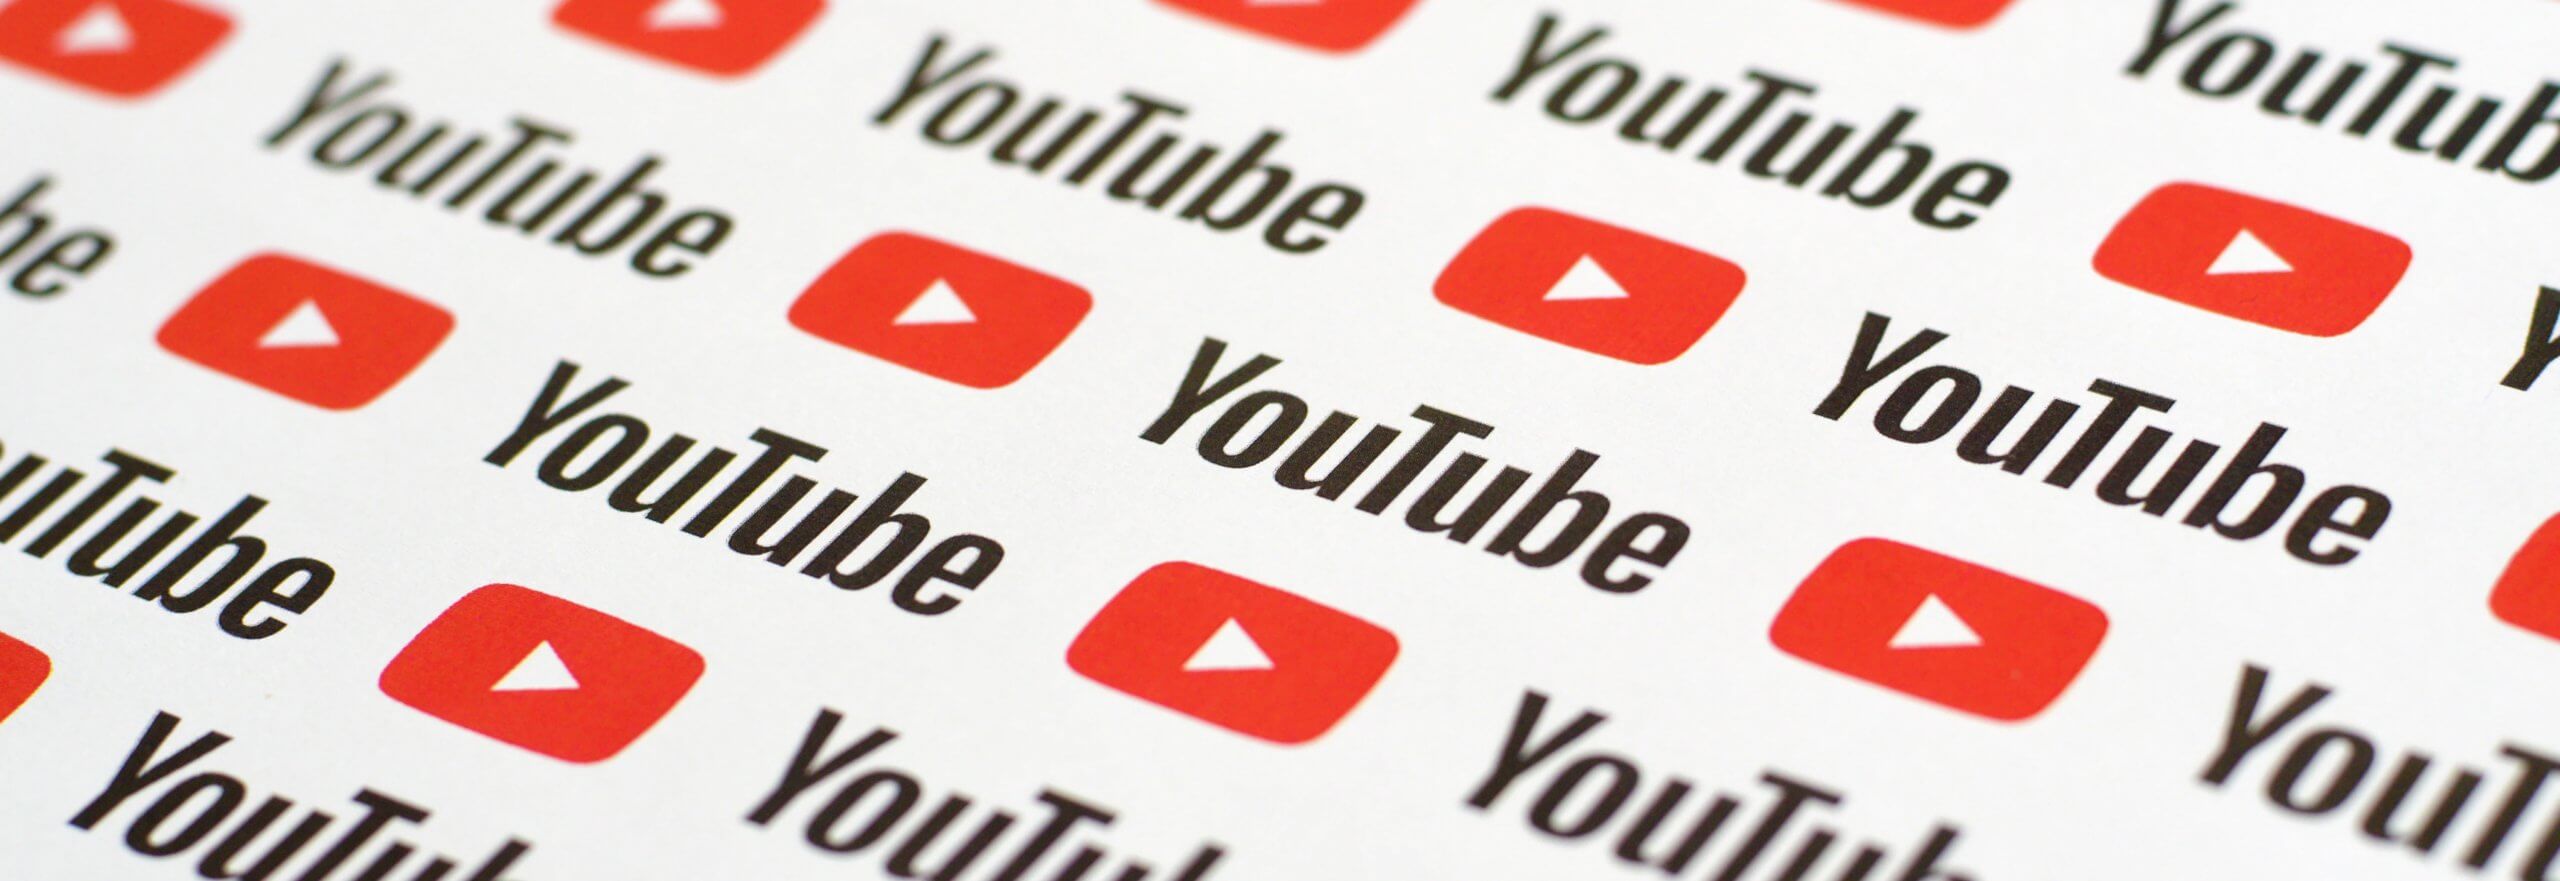 5 Ways to Increase Your YouTube Subscribers